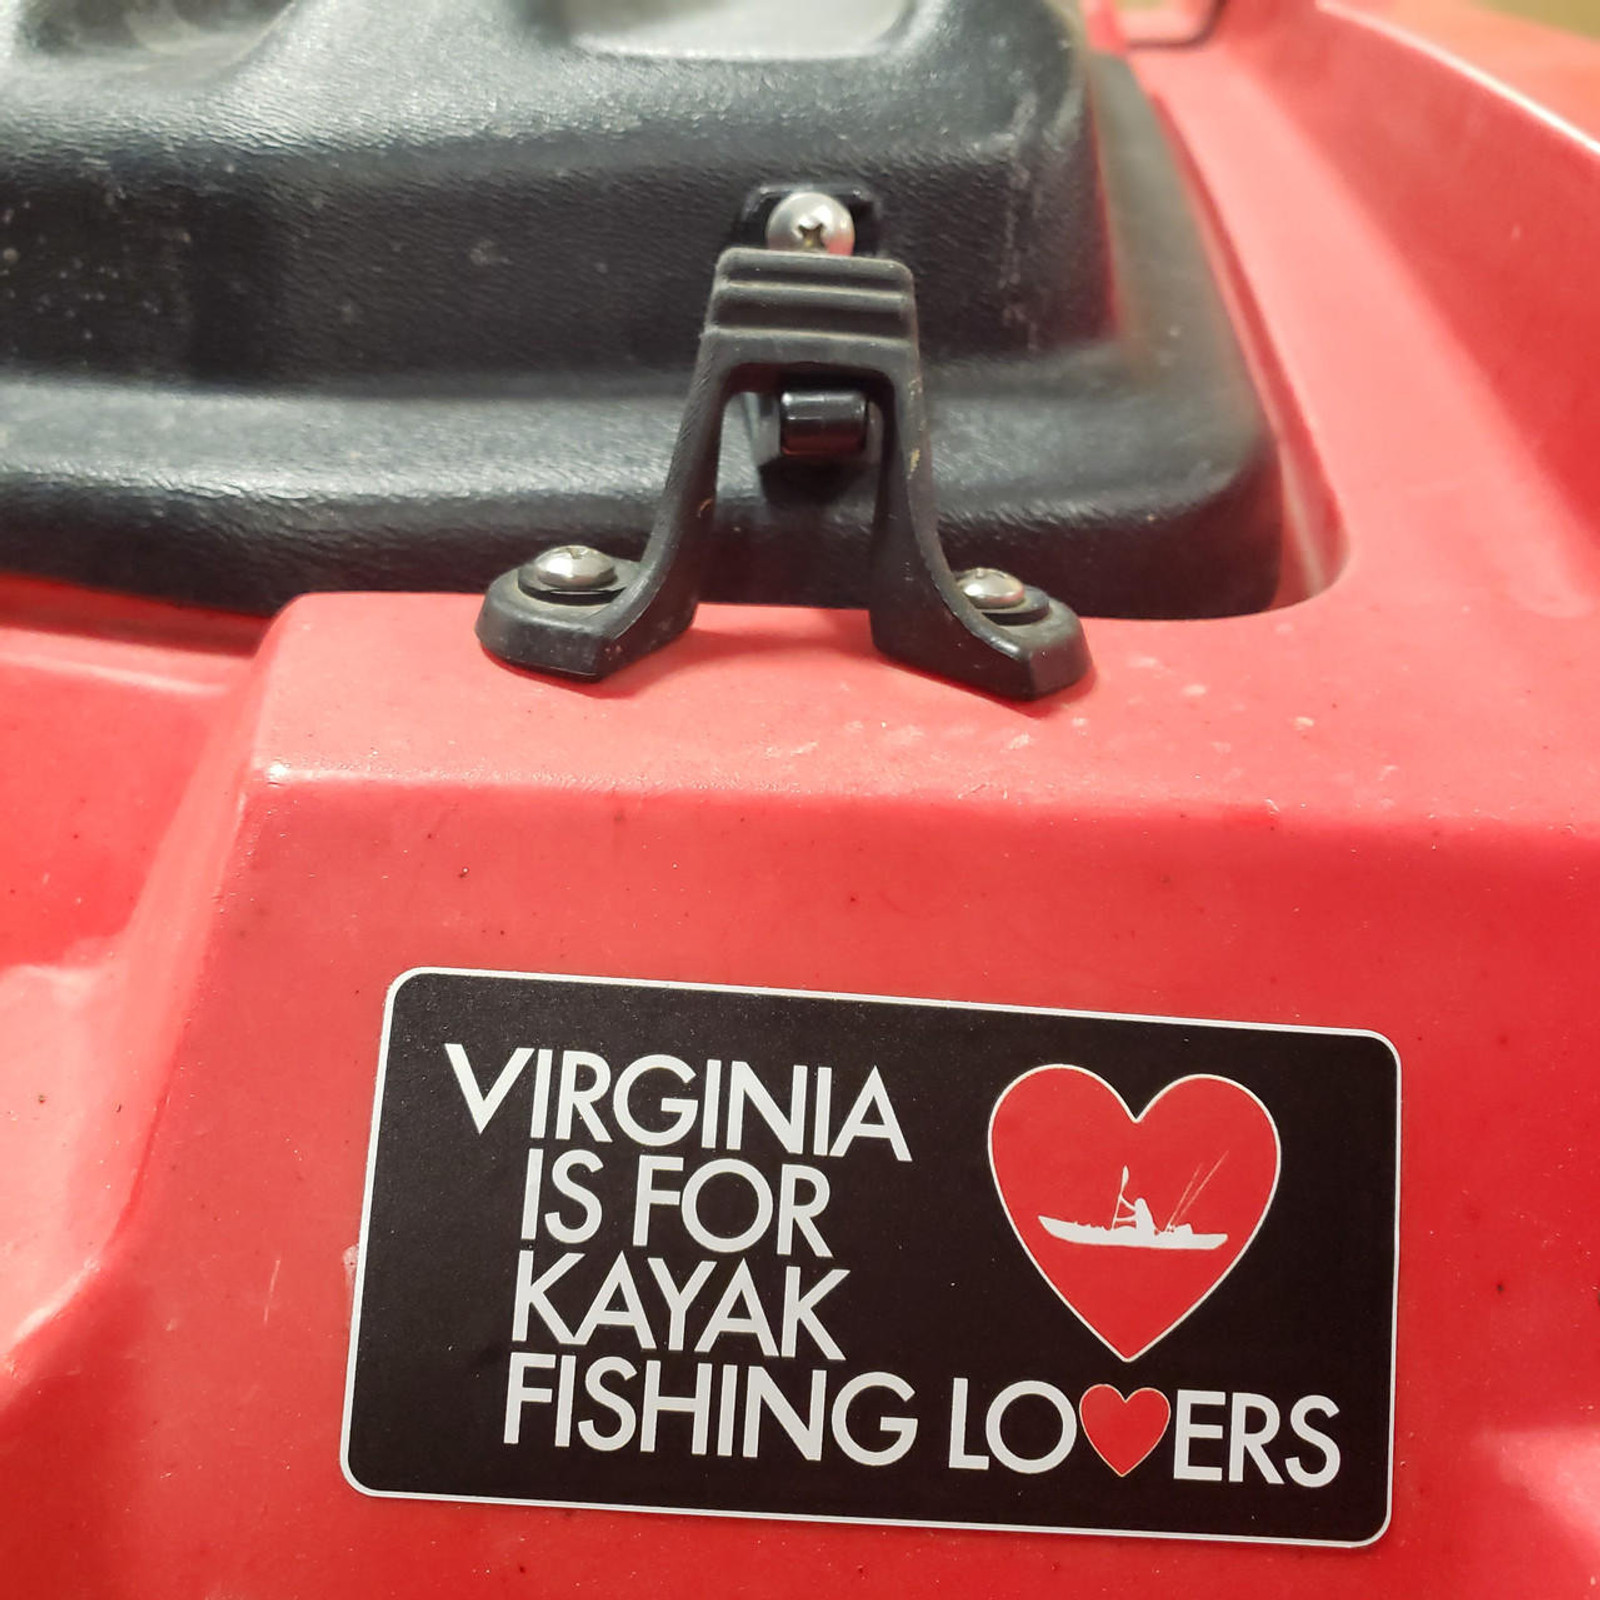  Virginia is for Kayak Lovers Decal 3.75" x 2" 